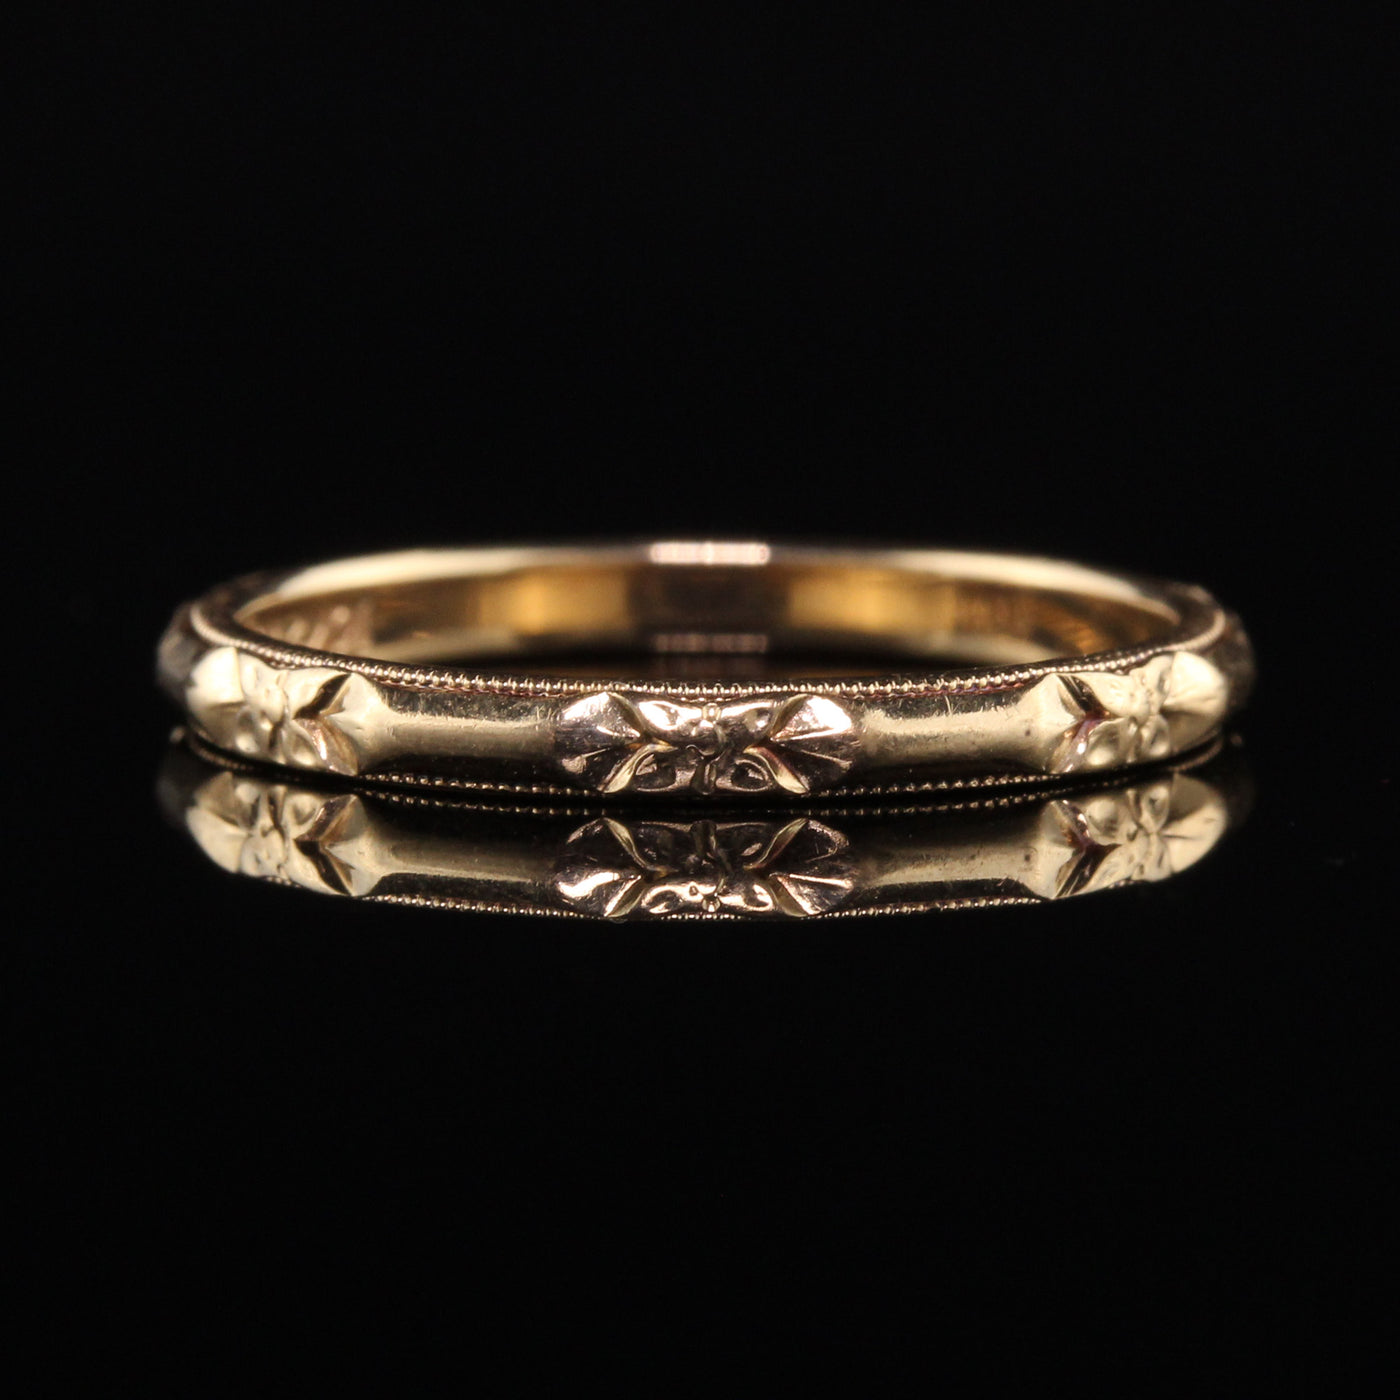 Antique Art Deco J.R. Wood 10K Yellow Gold Engraved Wedding Band - Size 5